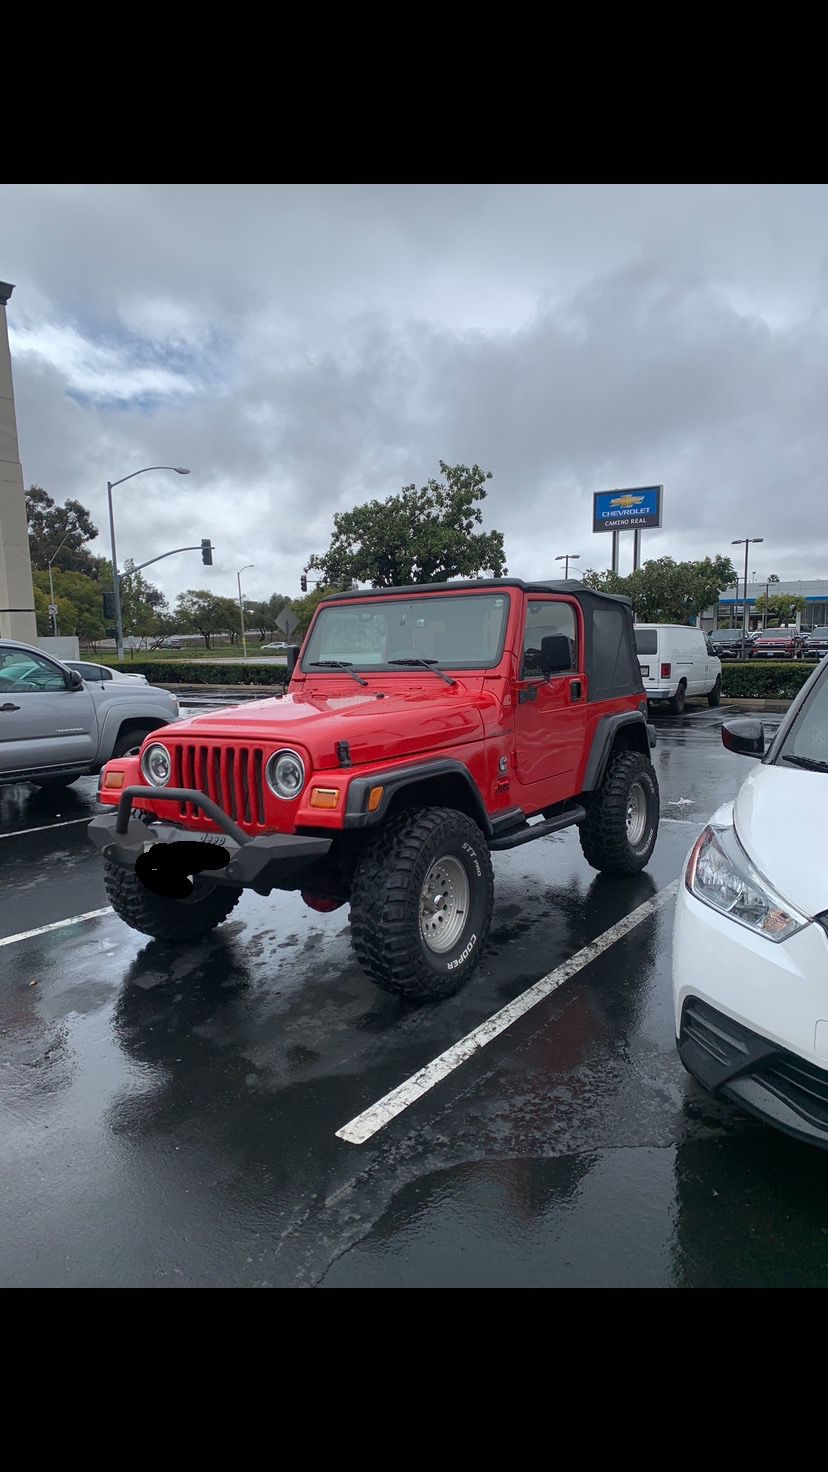 2000 Jeep Wrangler for Sale in Los Angeles, CA - OfferUp